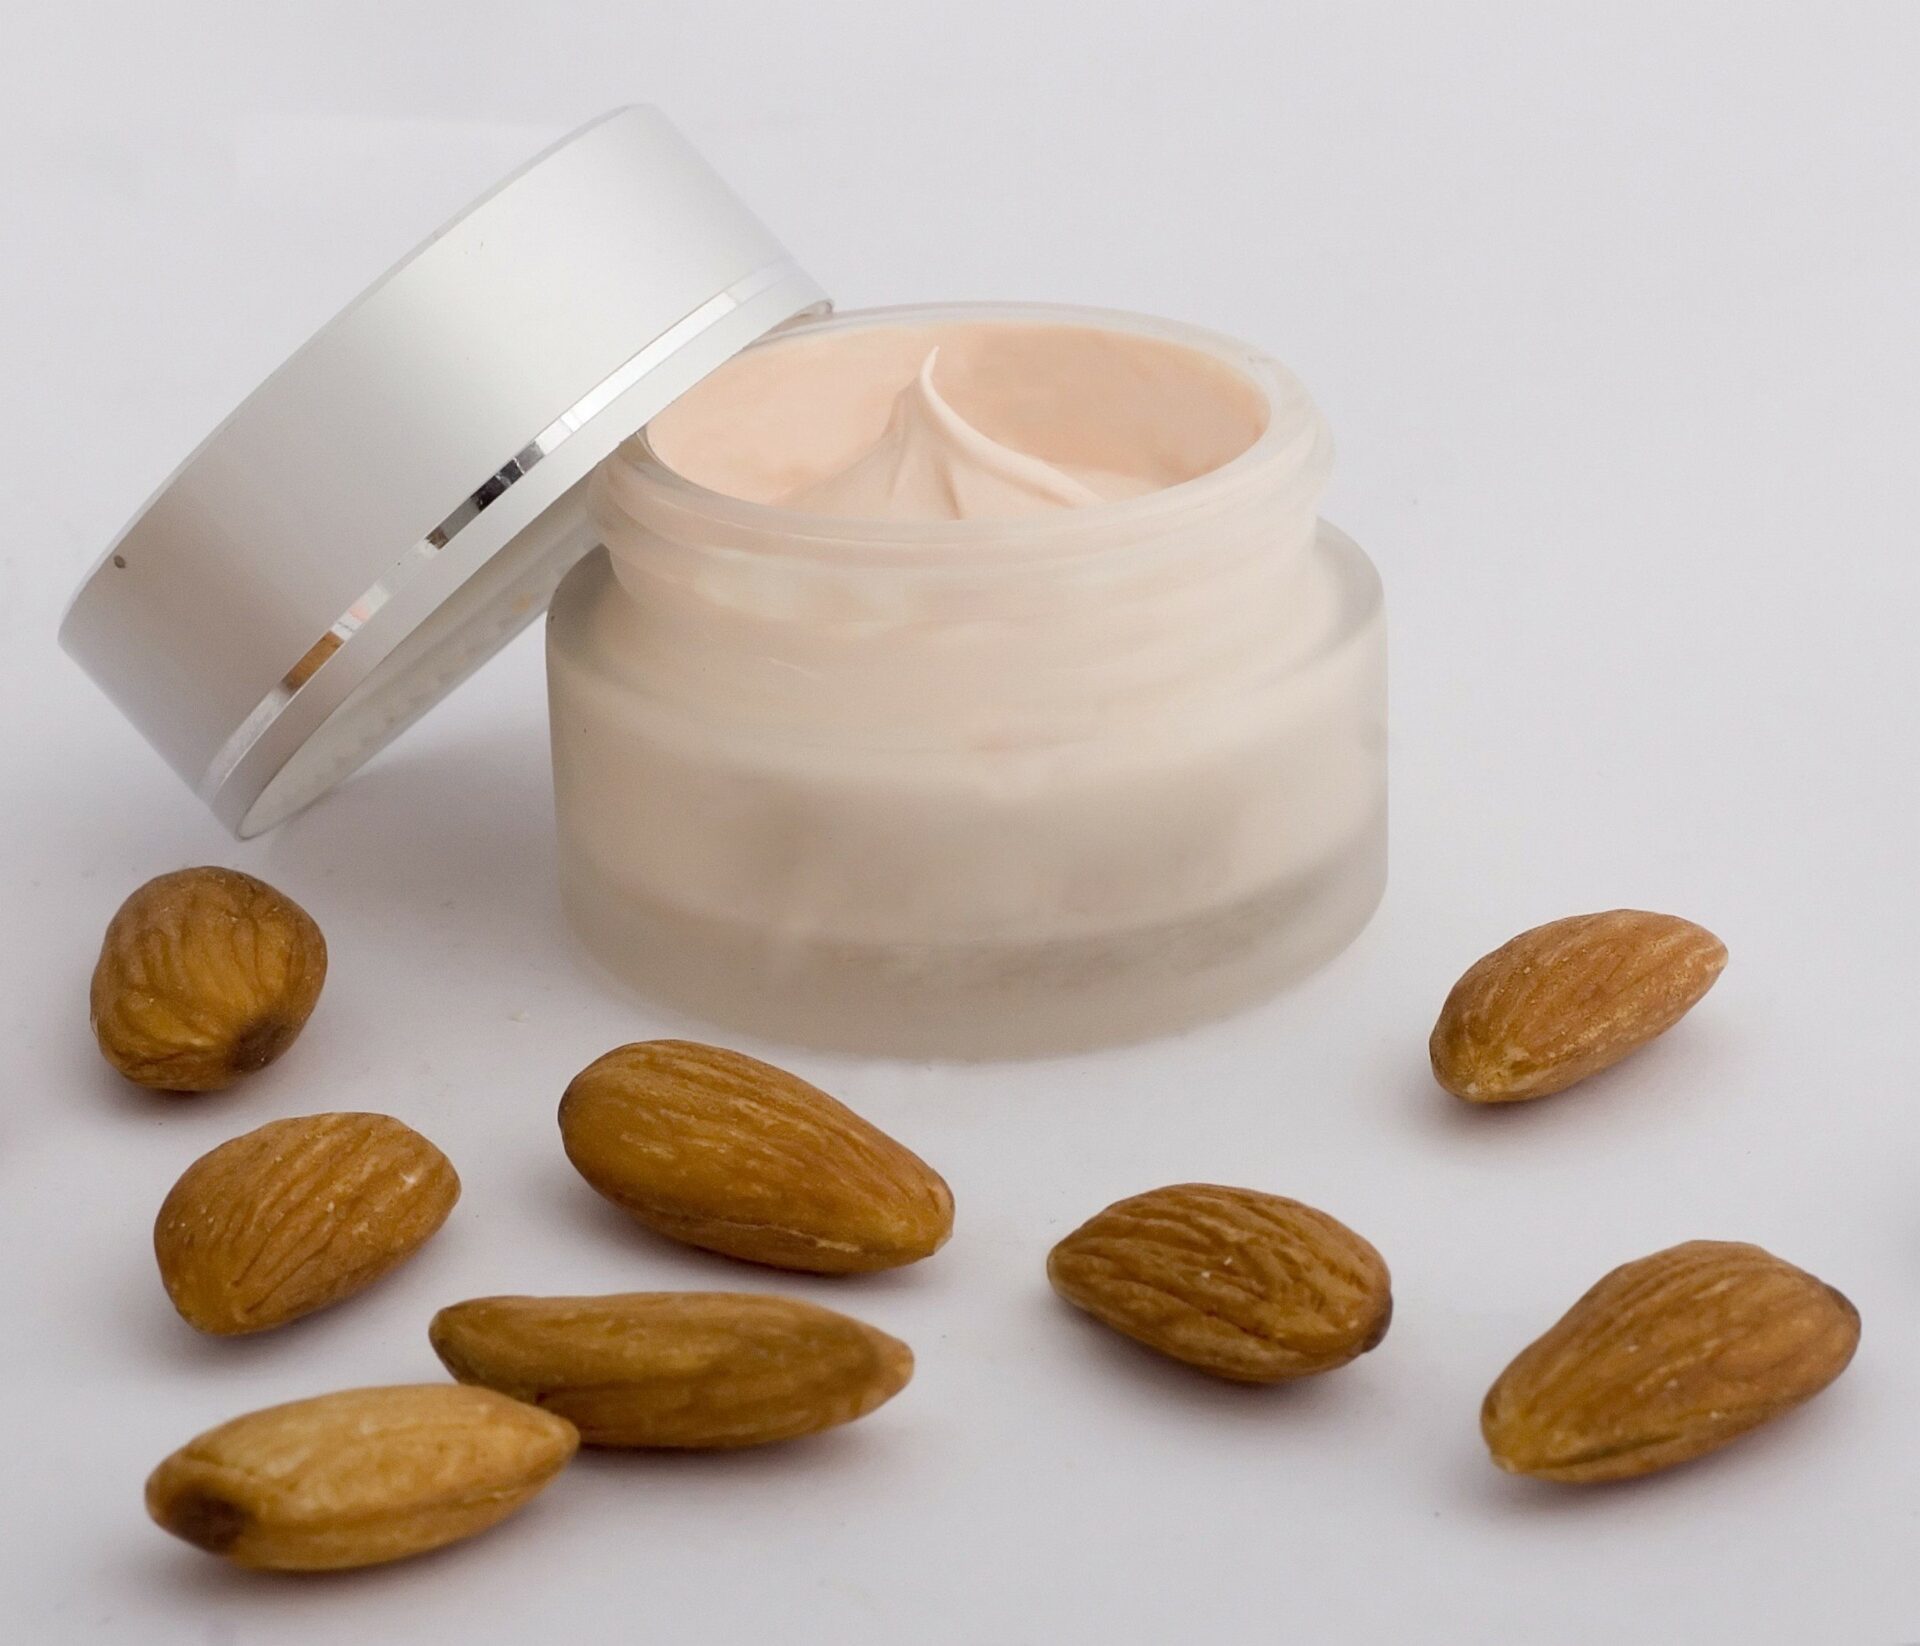 A Container of Almond Oil Skin Cream with Whole Almonds sitting in Front - Almond Oil in Cosmetics and Beauty Products